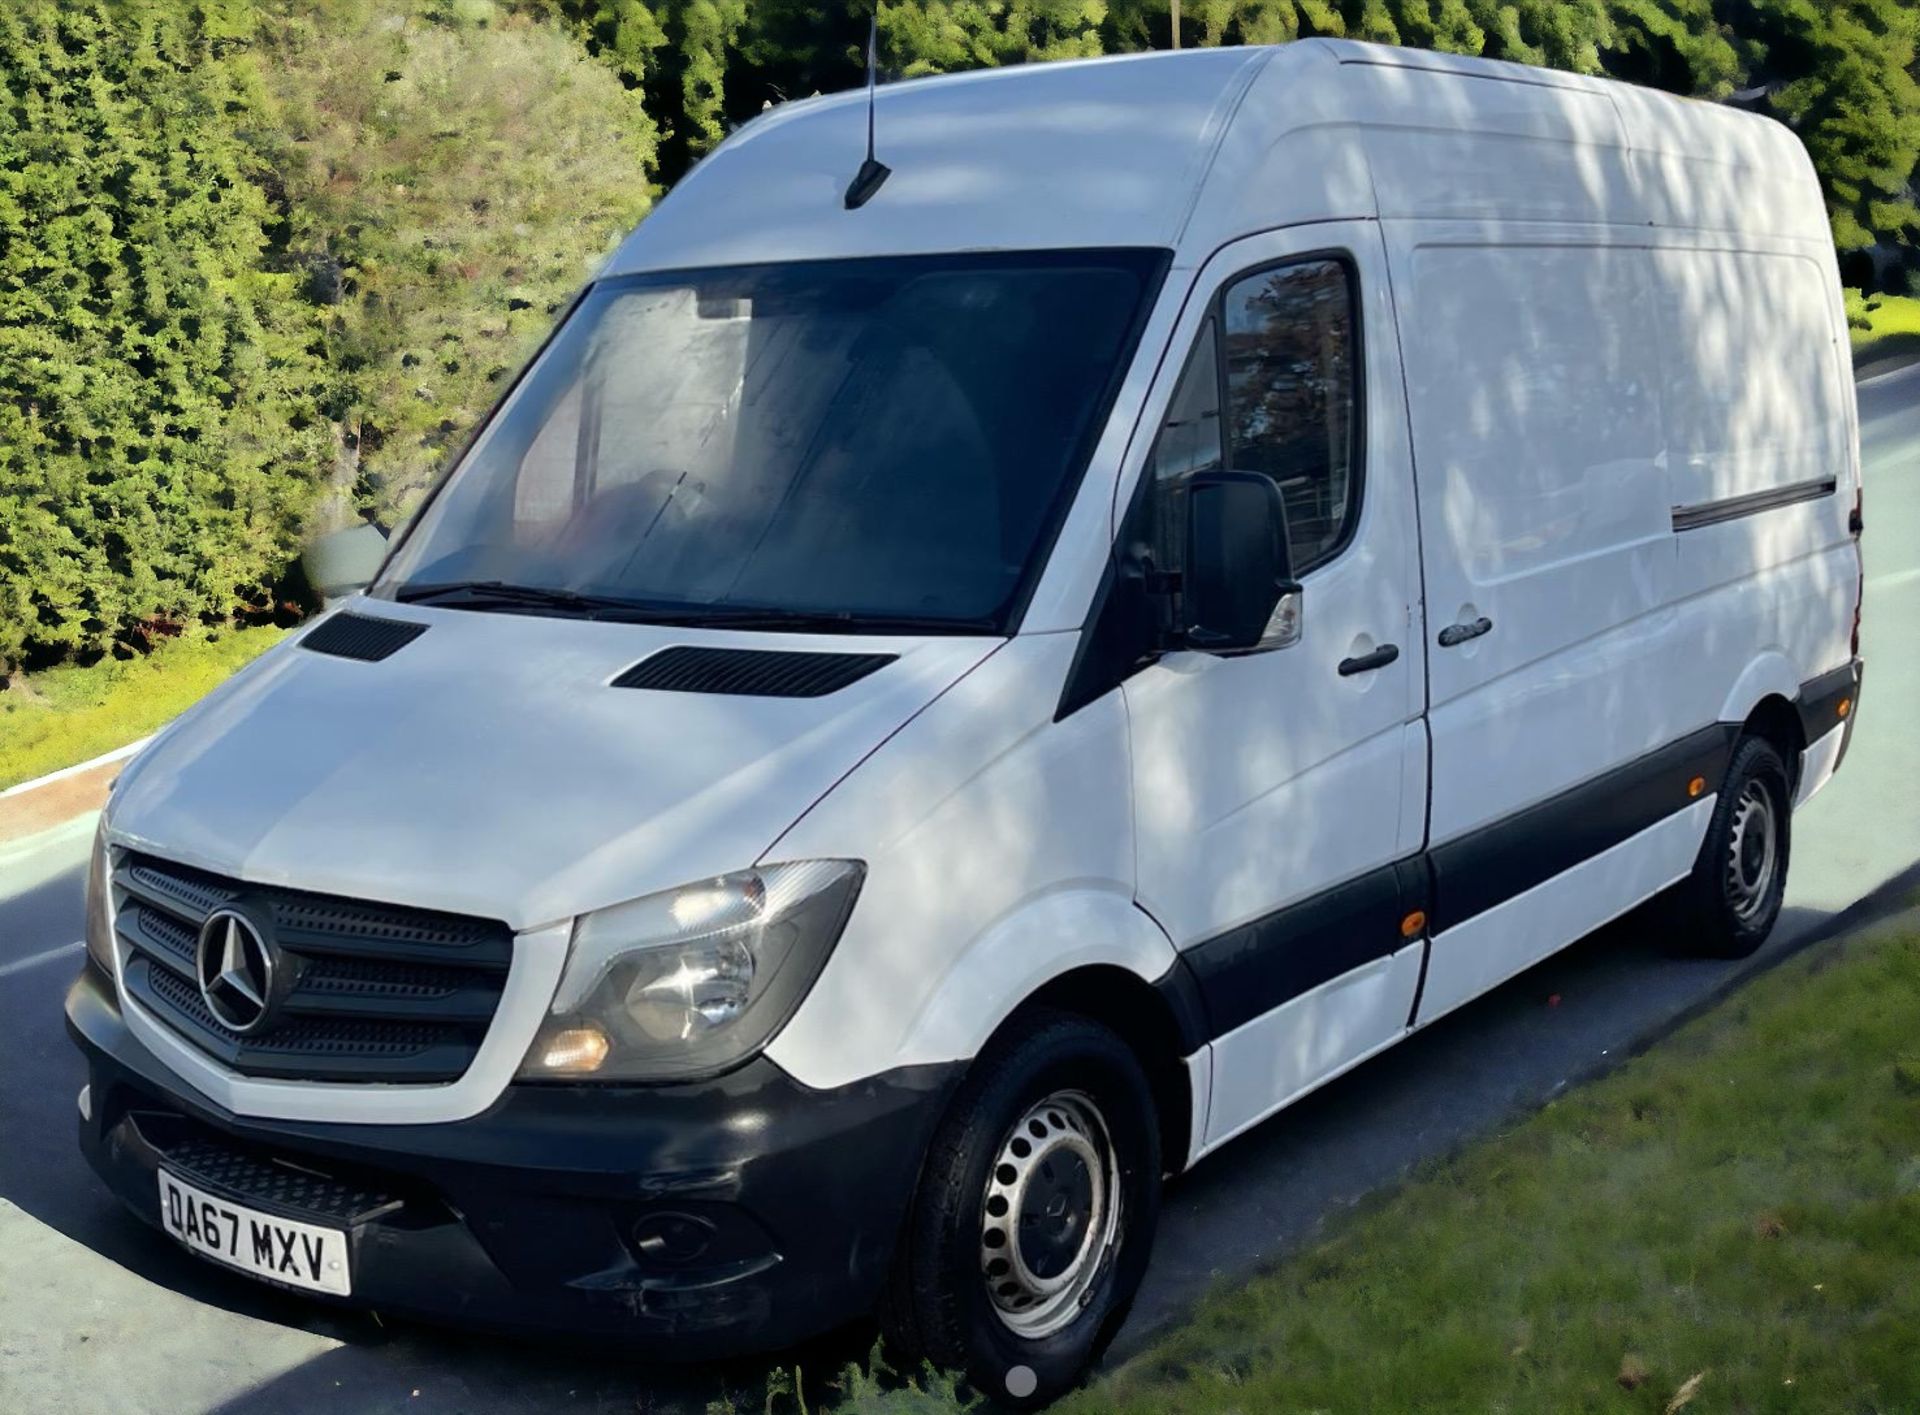 2017-67 REG MERCEDES SPRINTER 314 CDI MWB -HPI CLEAR - READY FOR WORK! - Image 4 of 9